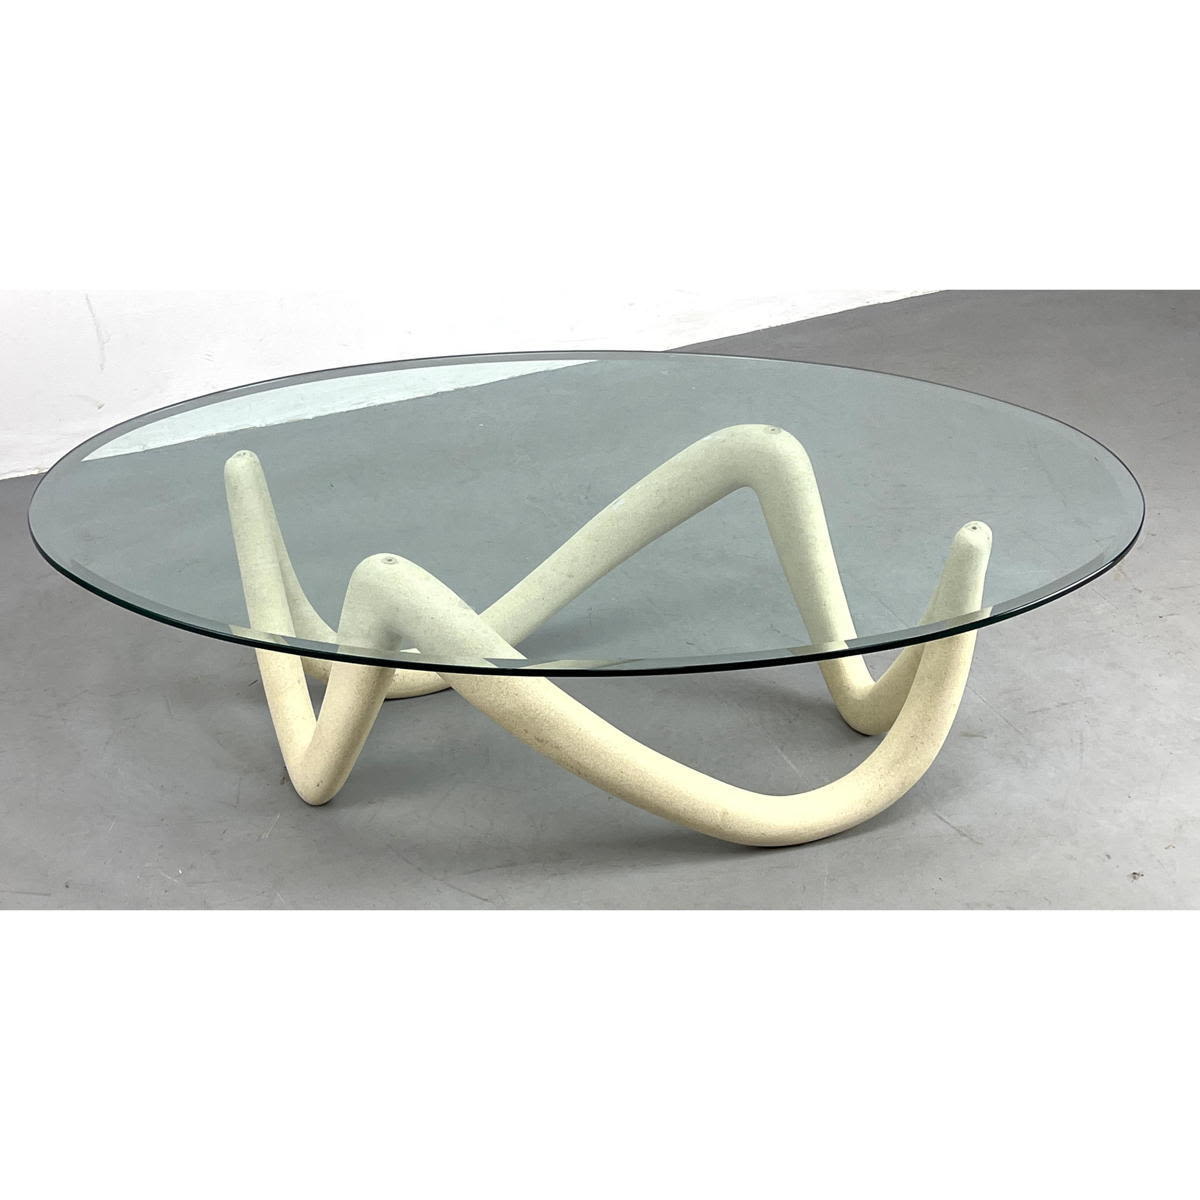 Modernist Coffee Table. Glass Top